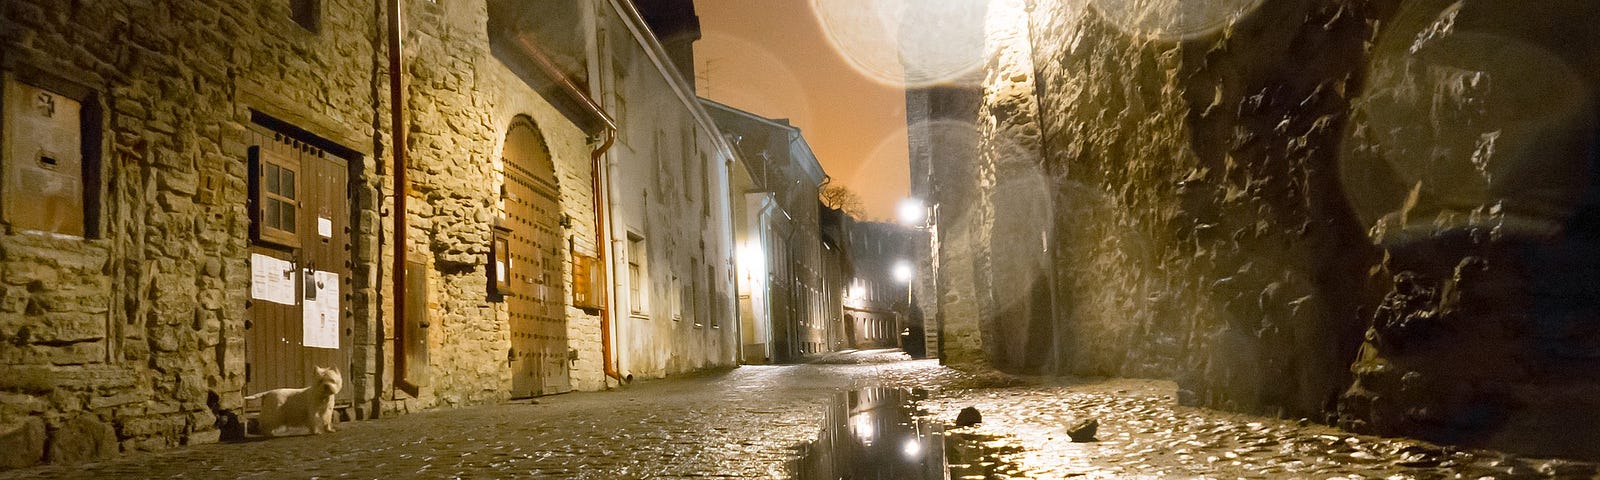 A cobblestone city street, glistening and wet from rain